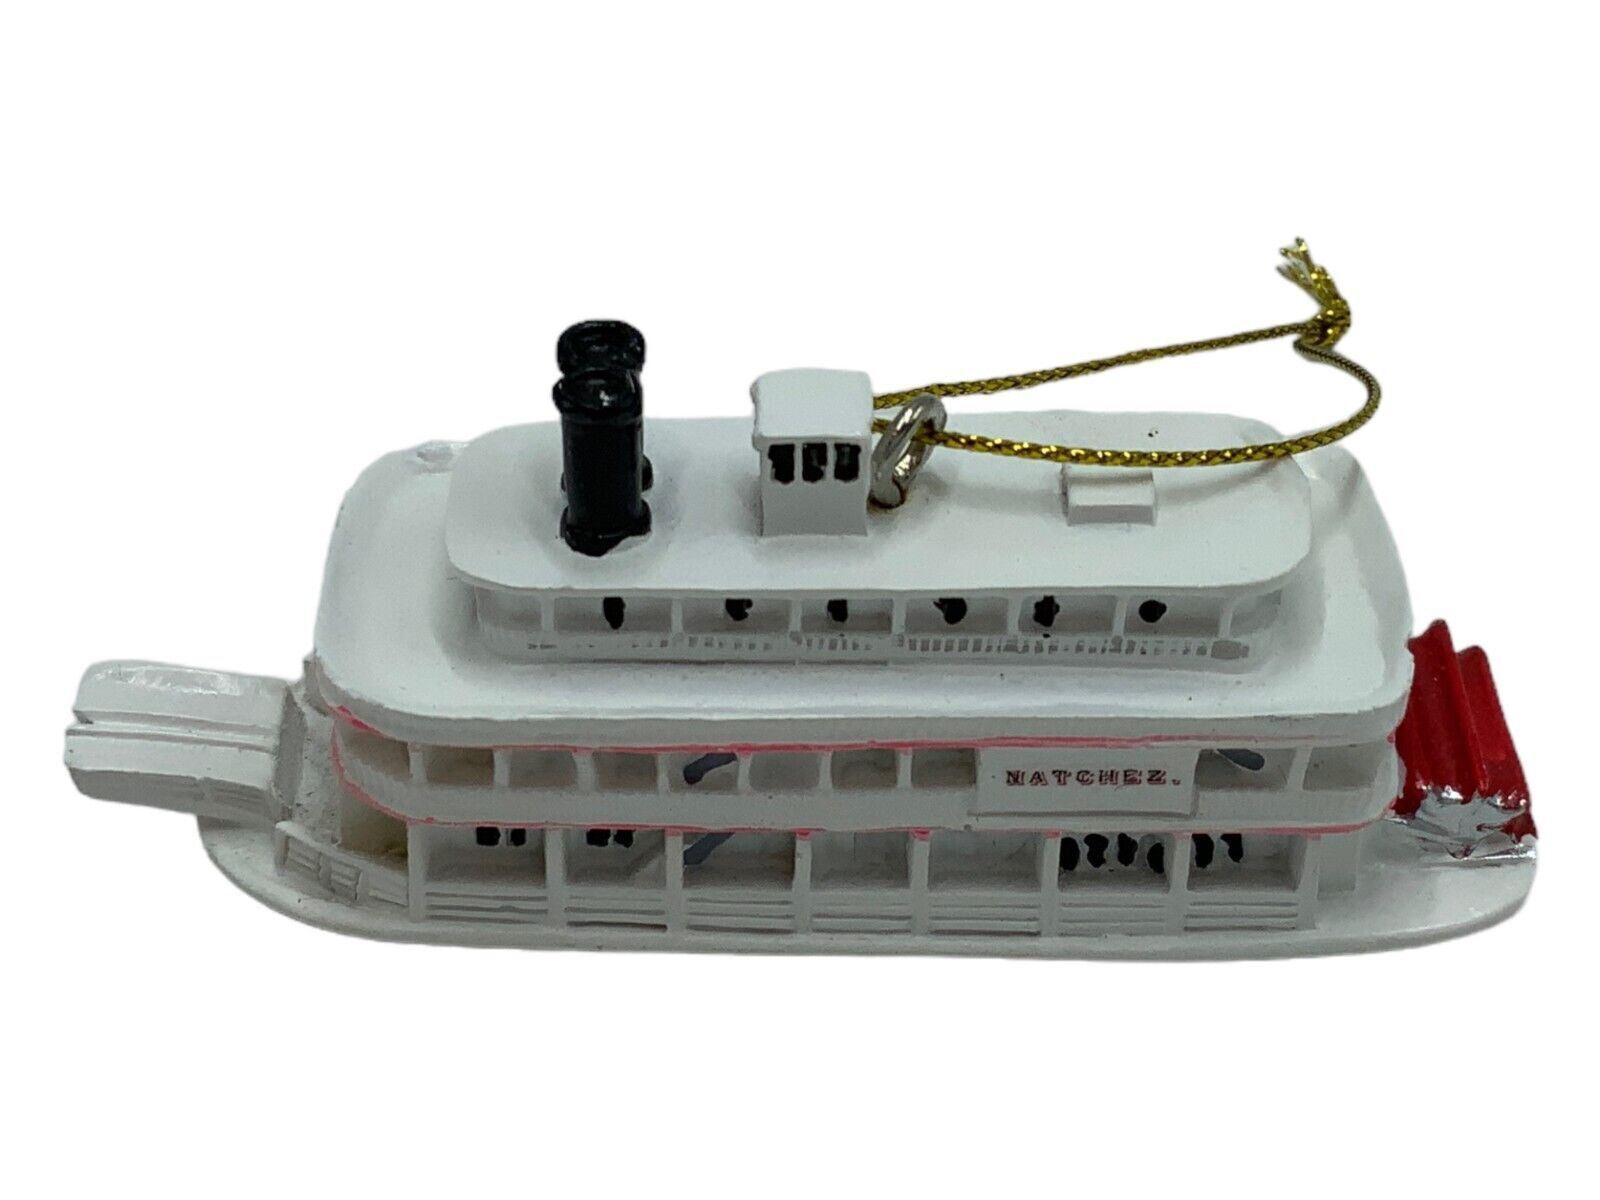 Riverboat Holiday Christmas Ornament Decoration